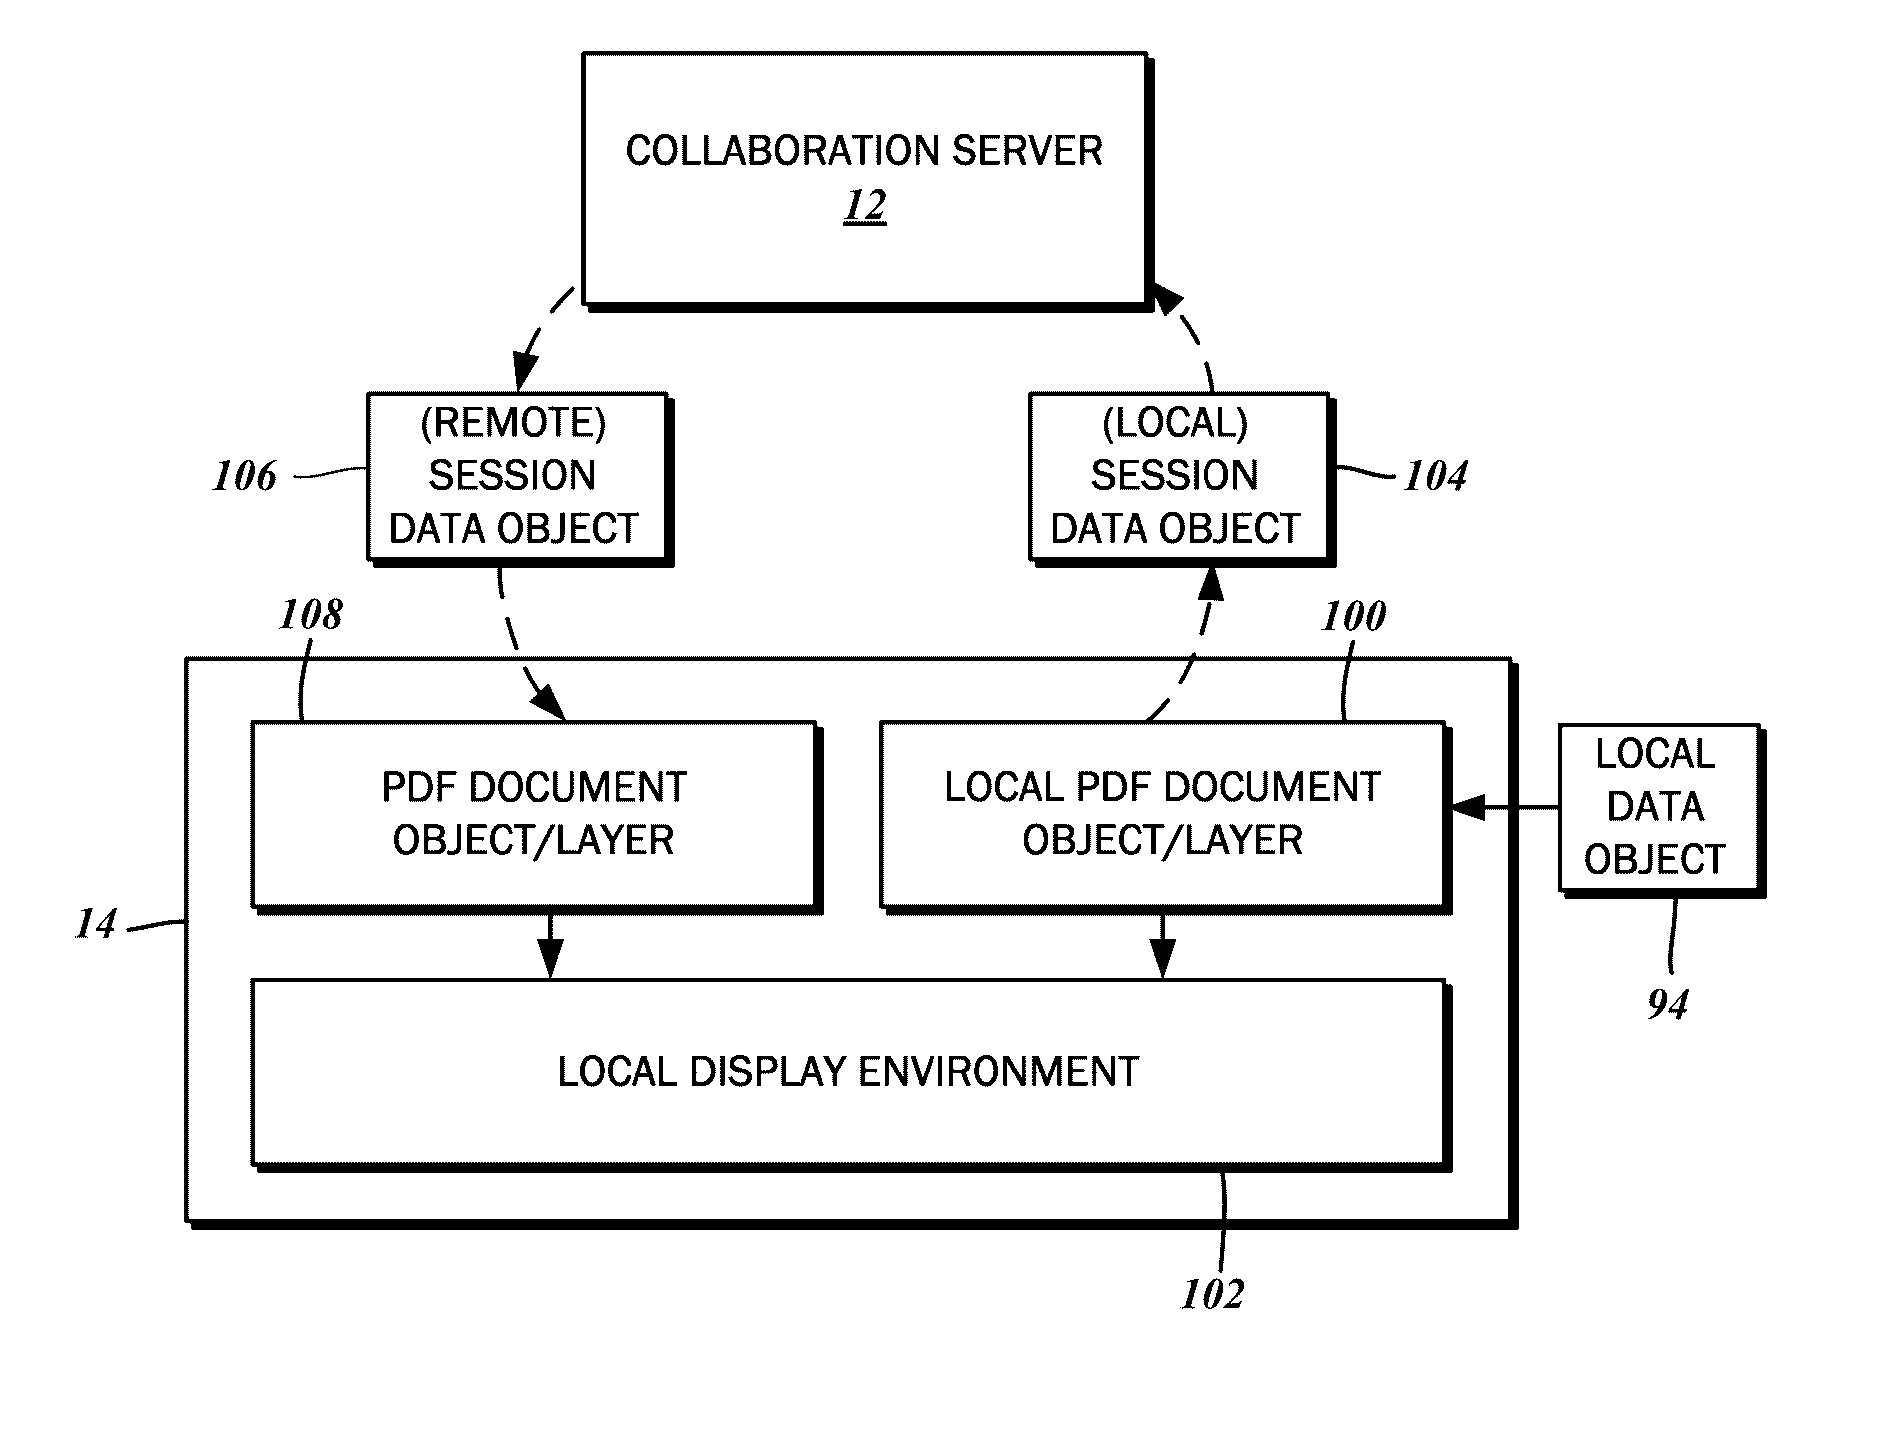 Method for archiving a collaboration session with a multimedia data stream and view parameters